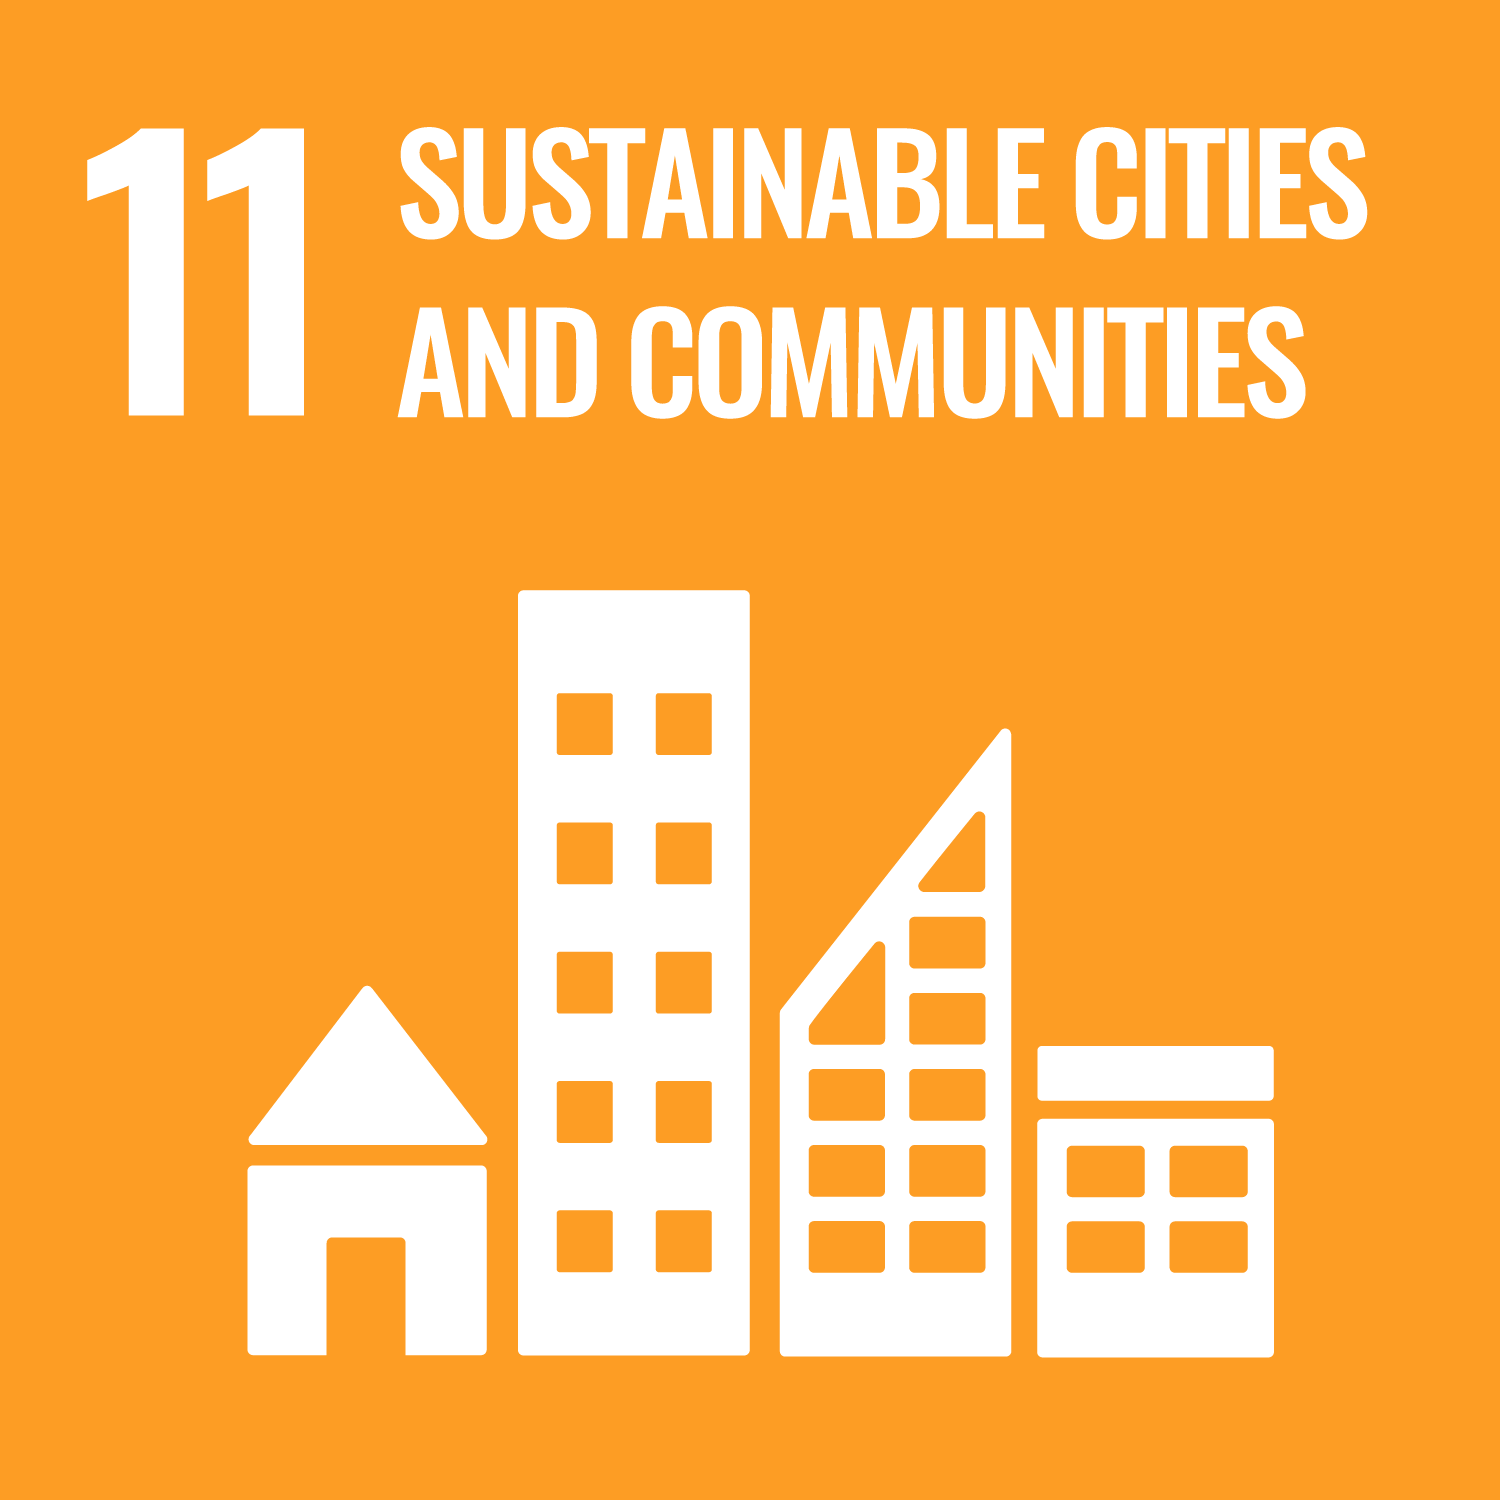 SDG 11. Sustainable cities and communities